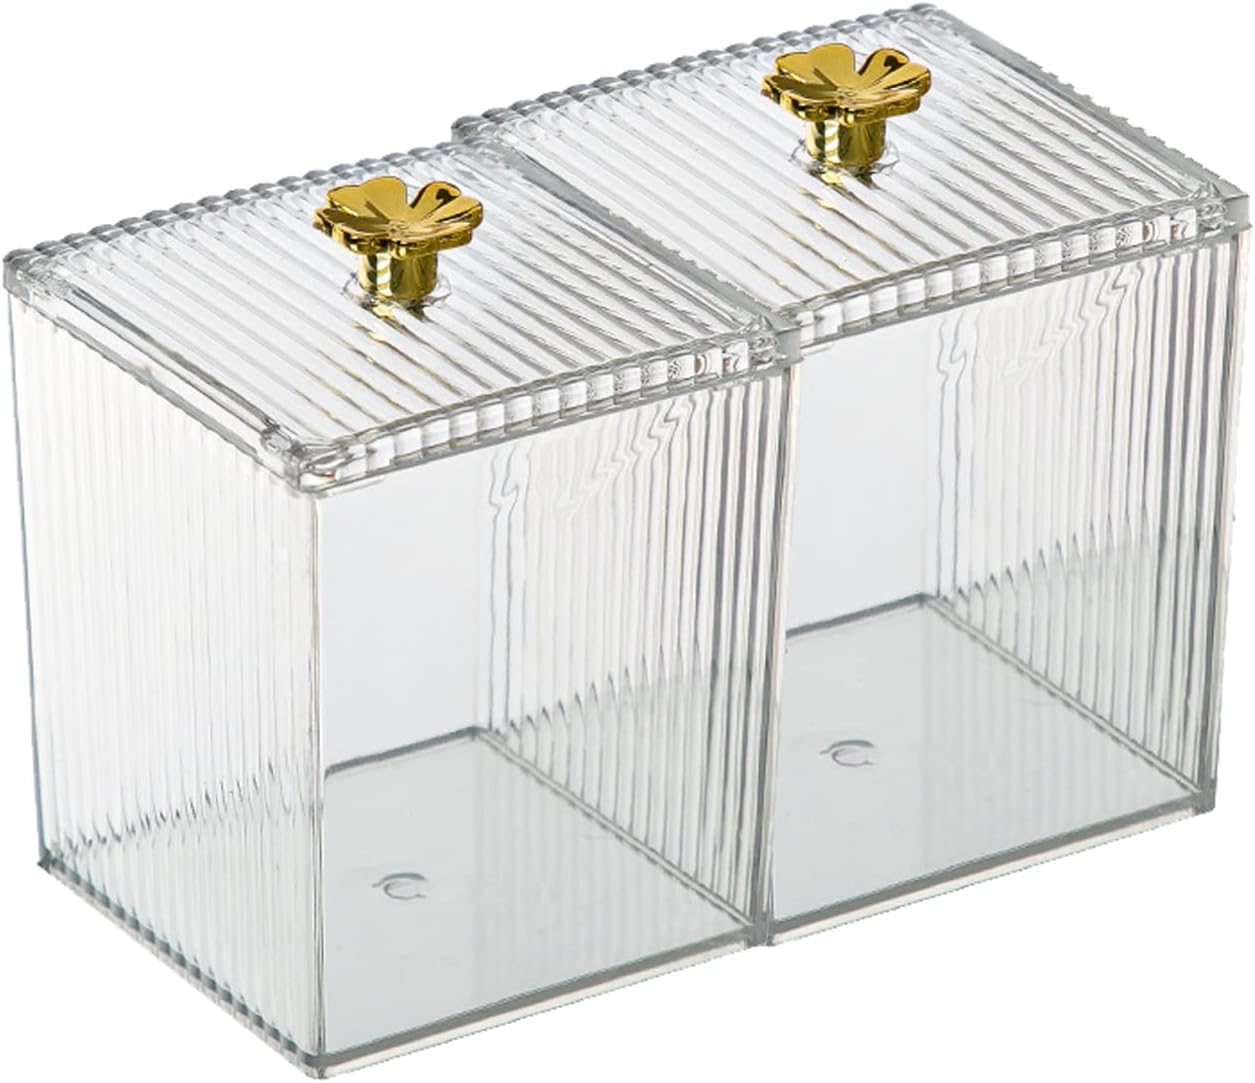 The dressing rack organizer is made of clear acrylic, one piece of suitable size